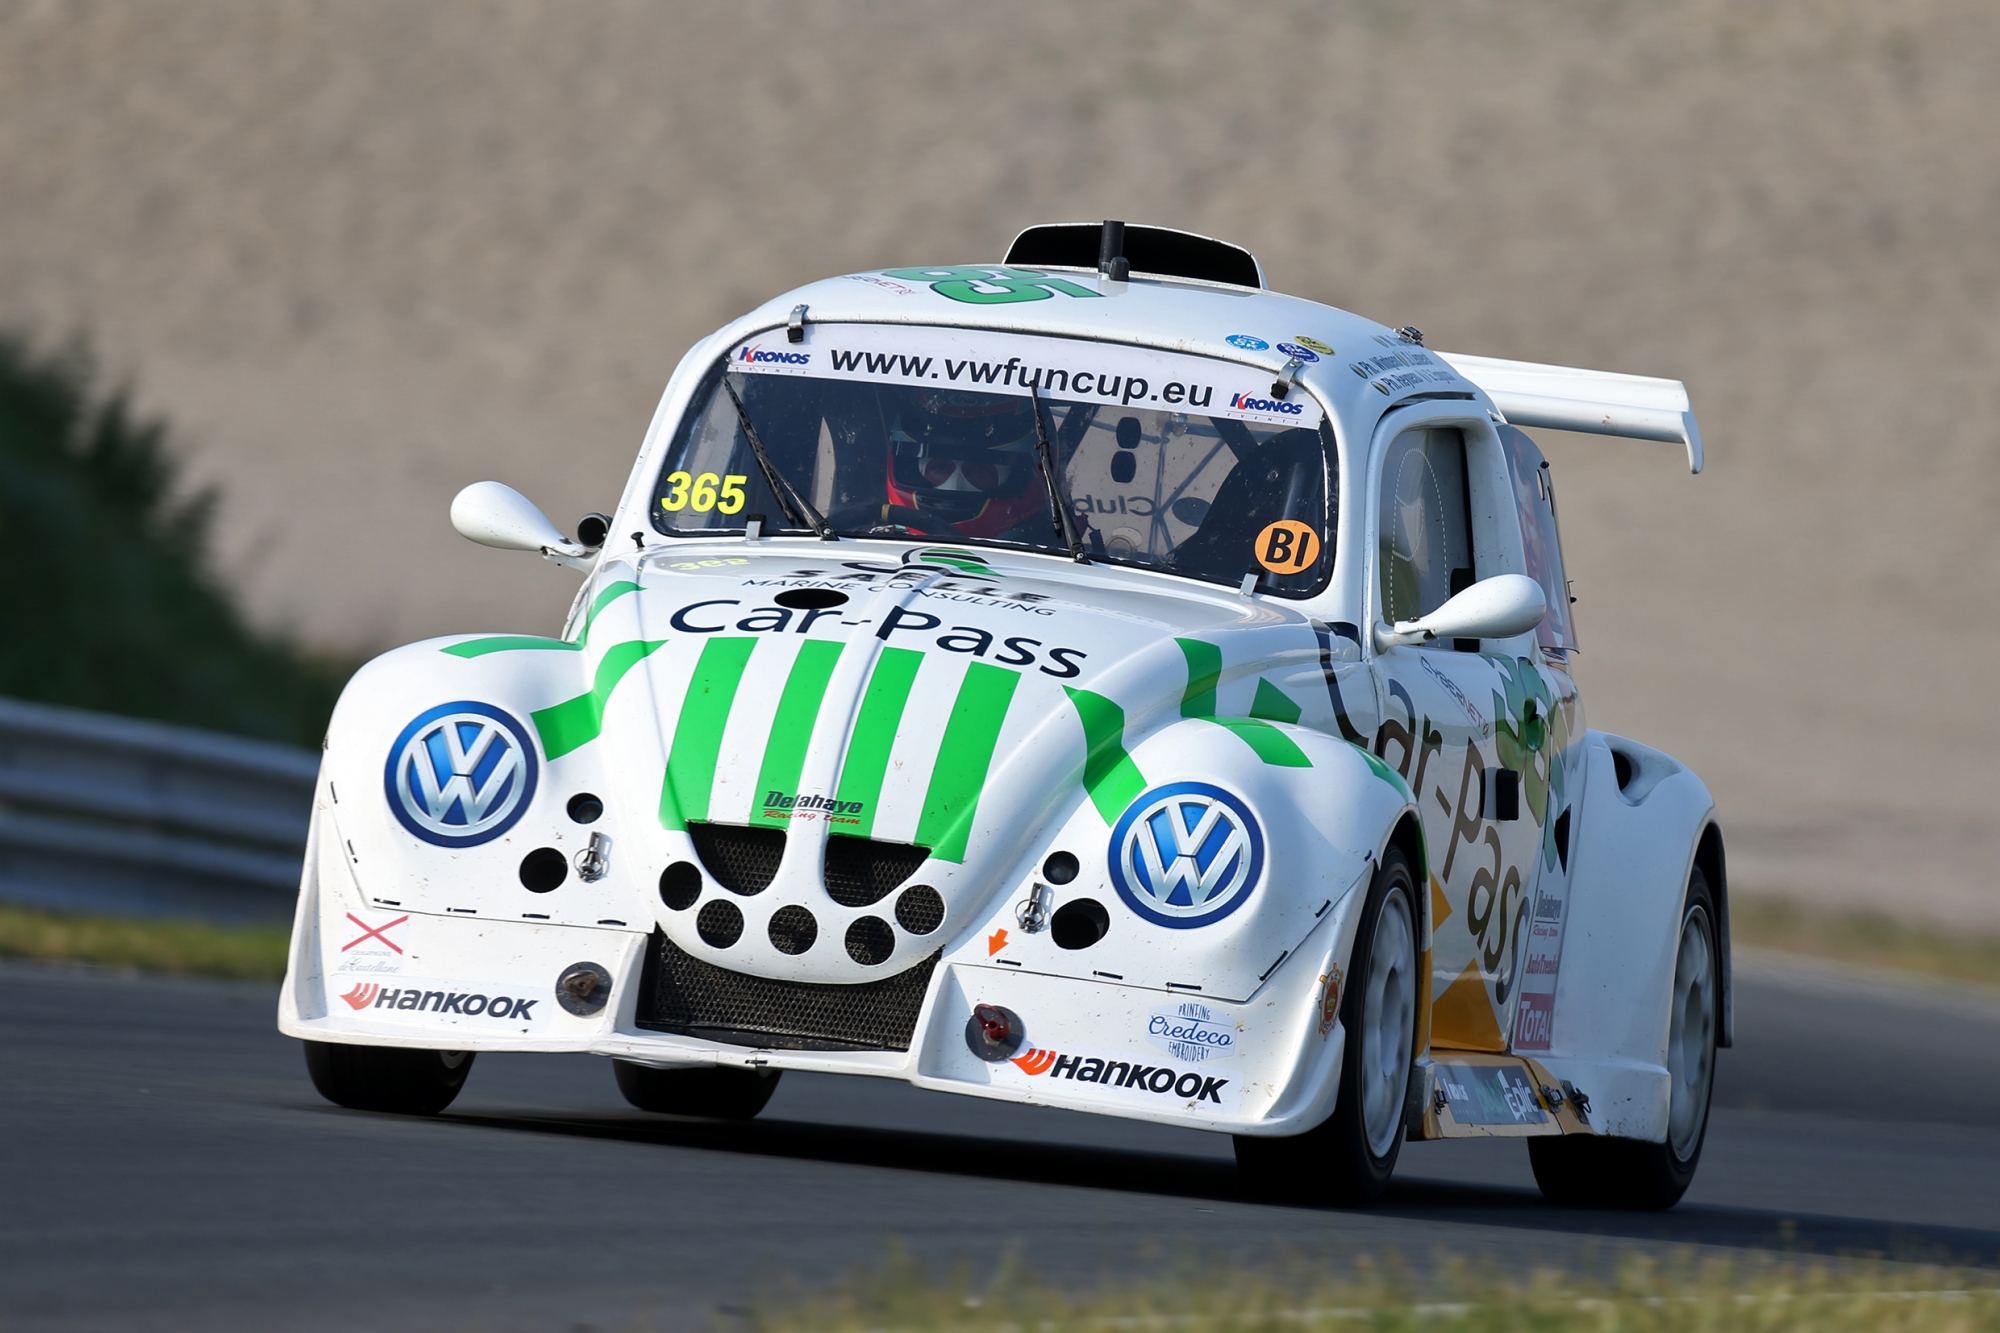 image 3 - Socardenne by Milo grabs the Pole Position in Zandvoort